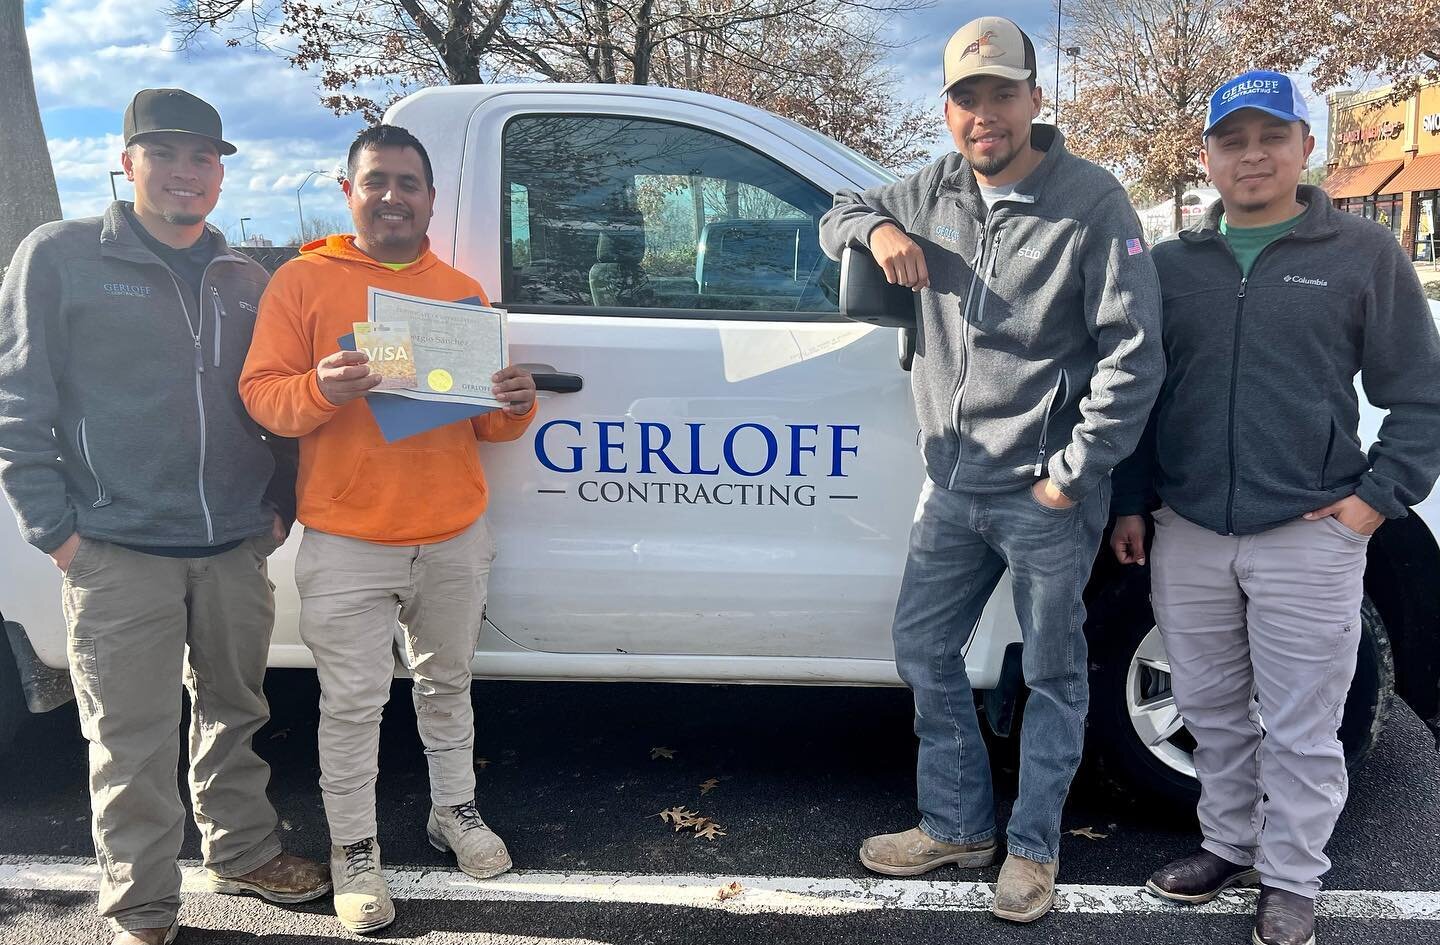 Congratulations to our latest Employee of the Month, Sergio; Foreman of the Month, Francisco; and Safety of the Month, Florencio! Your exemplary performance reflects the high standards we uphold here at Gerloff. Thank you for your continued commitmen